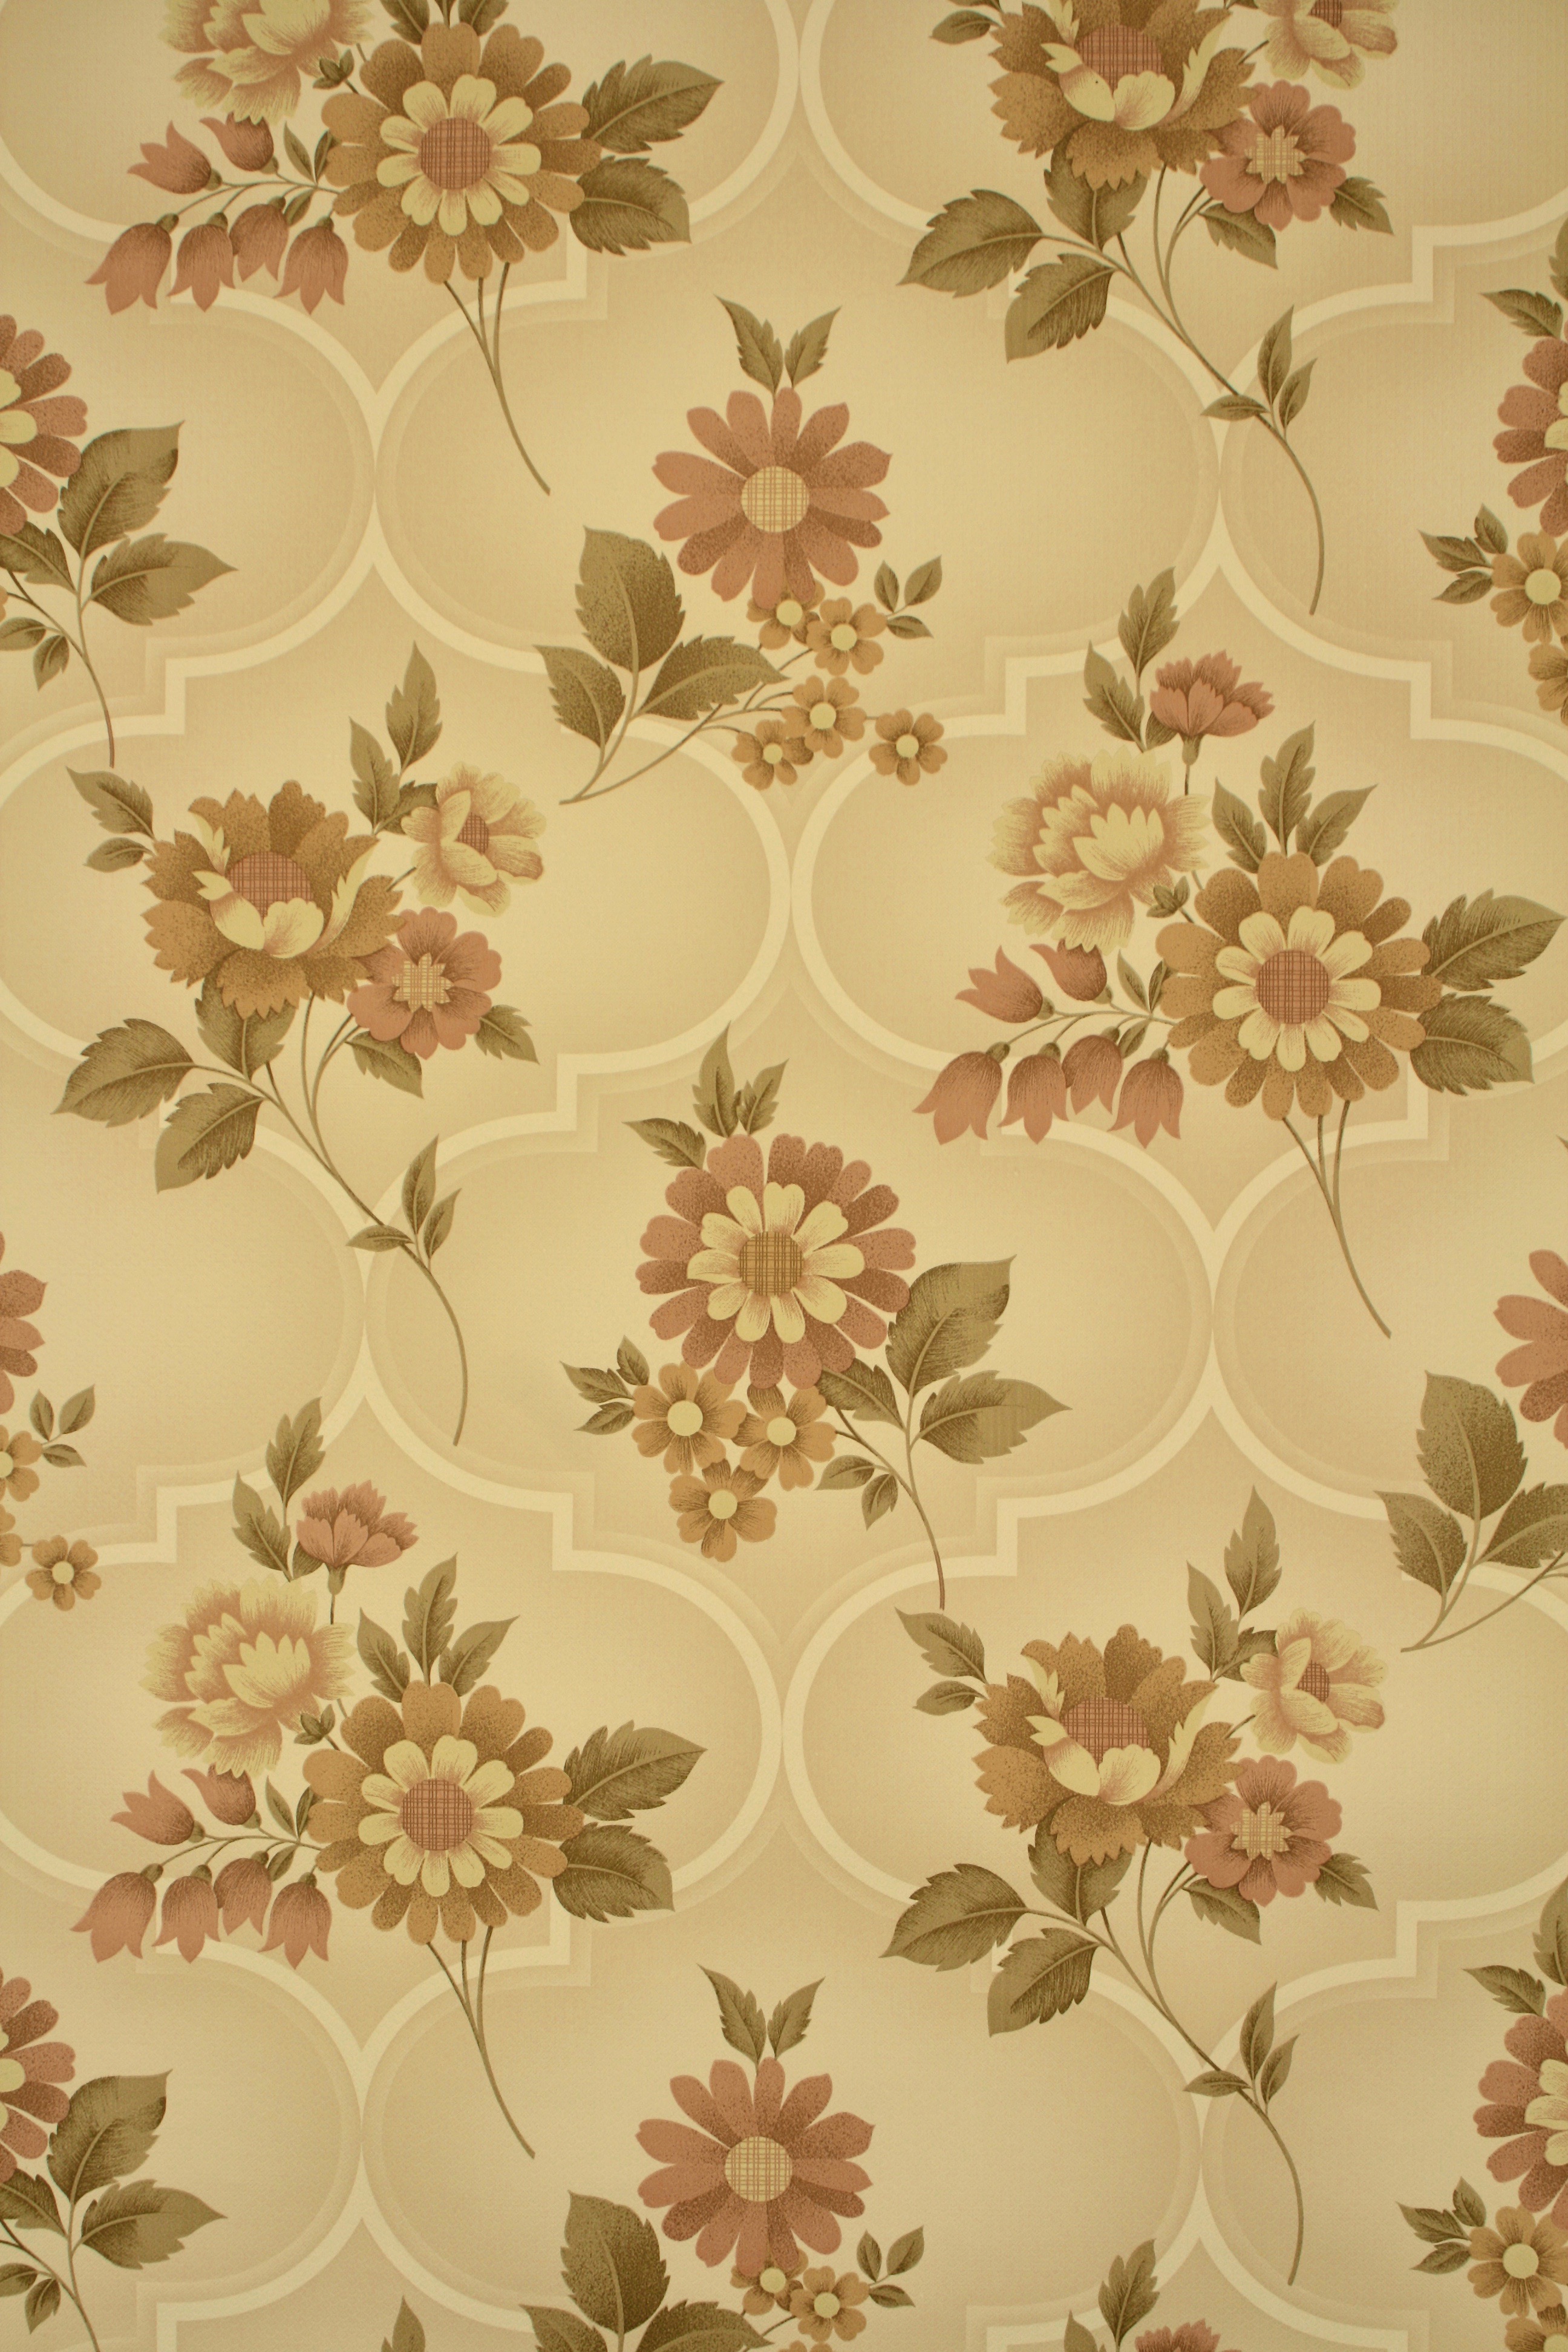 Seventies Floral Wallpaper with flower bush pattern